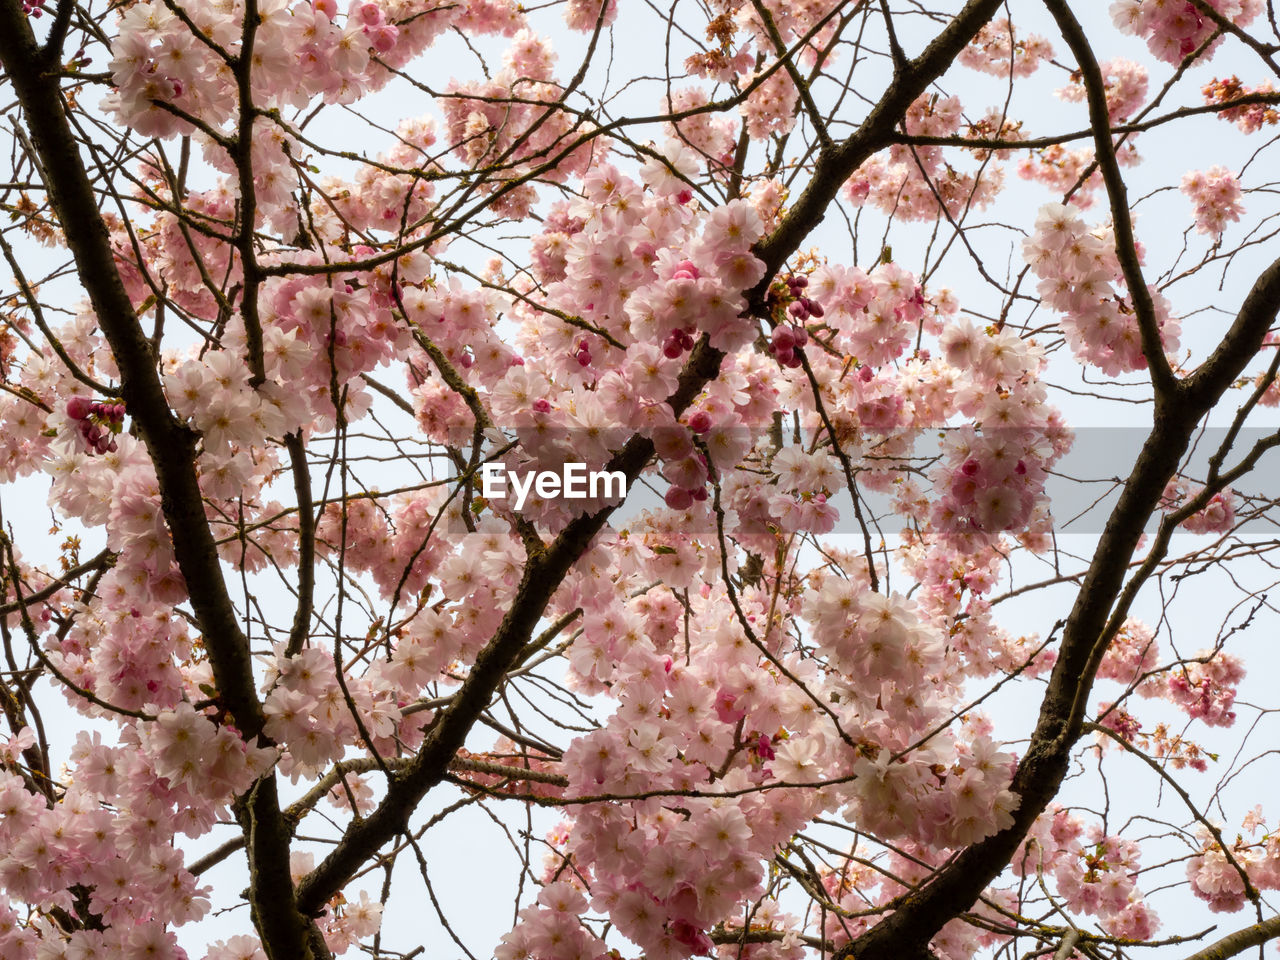 plant, tree, blossom, flower, springtime, flowering plant, fragility, branch, beauty in nature, growth, pink, low angle view, freshness, cherry blossom, nature, cherry tree, no people, day, sky, outdoors, produce, spring, botany, backgrounds, full frame, fruit tree, close-up